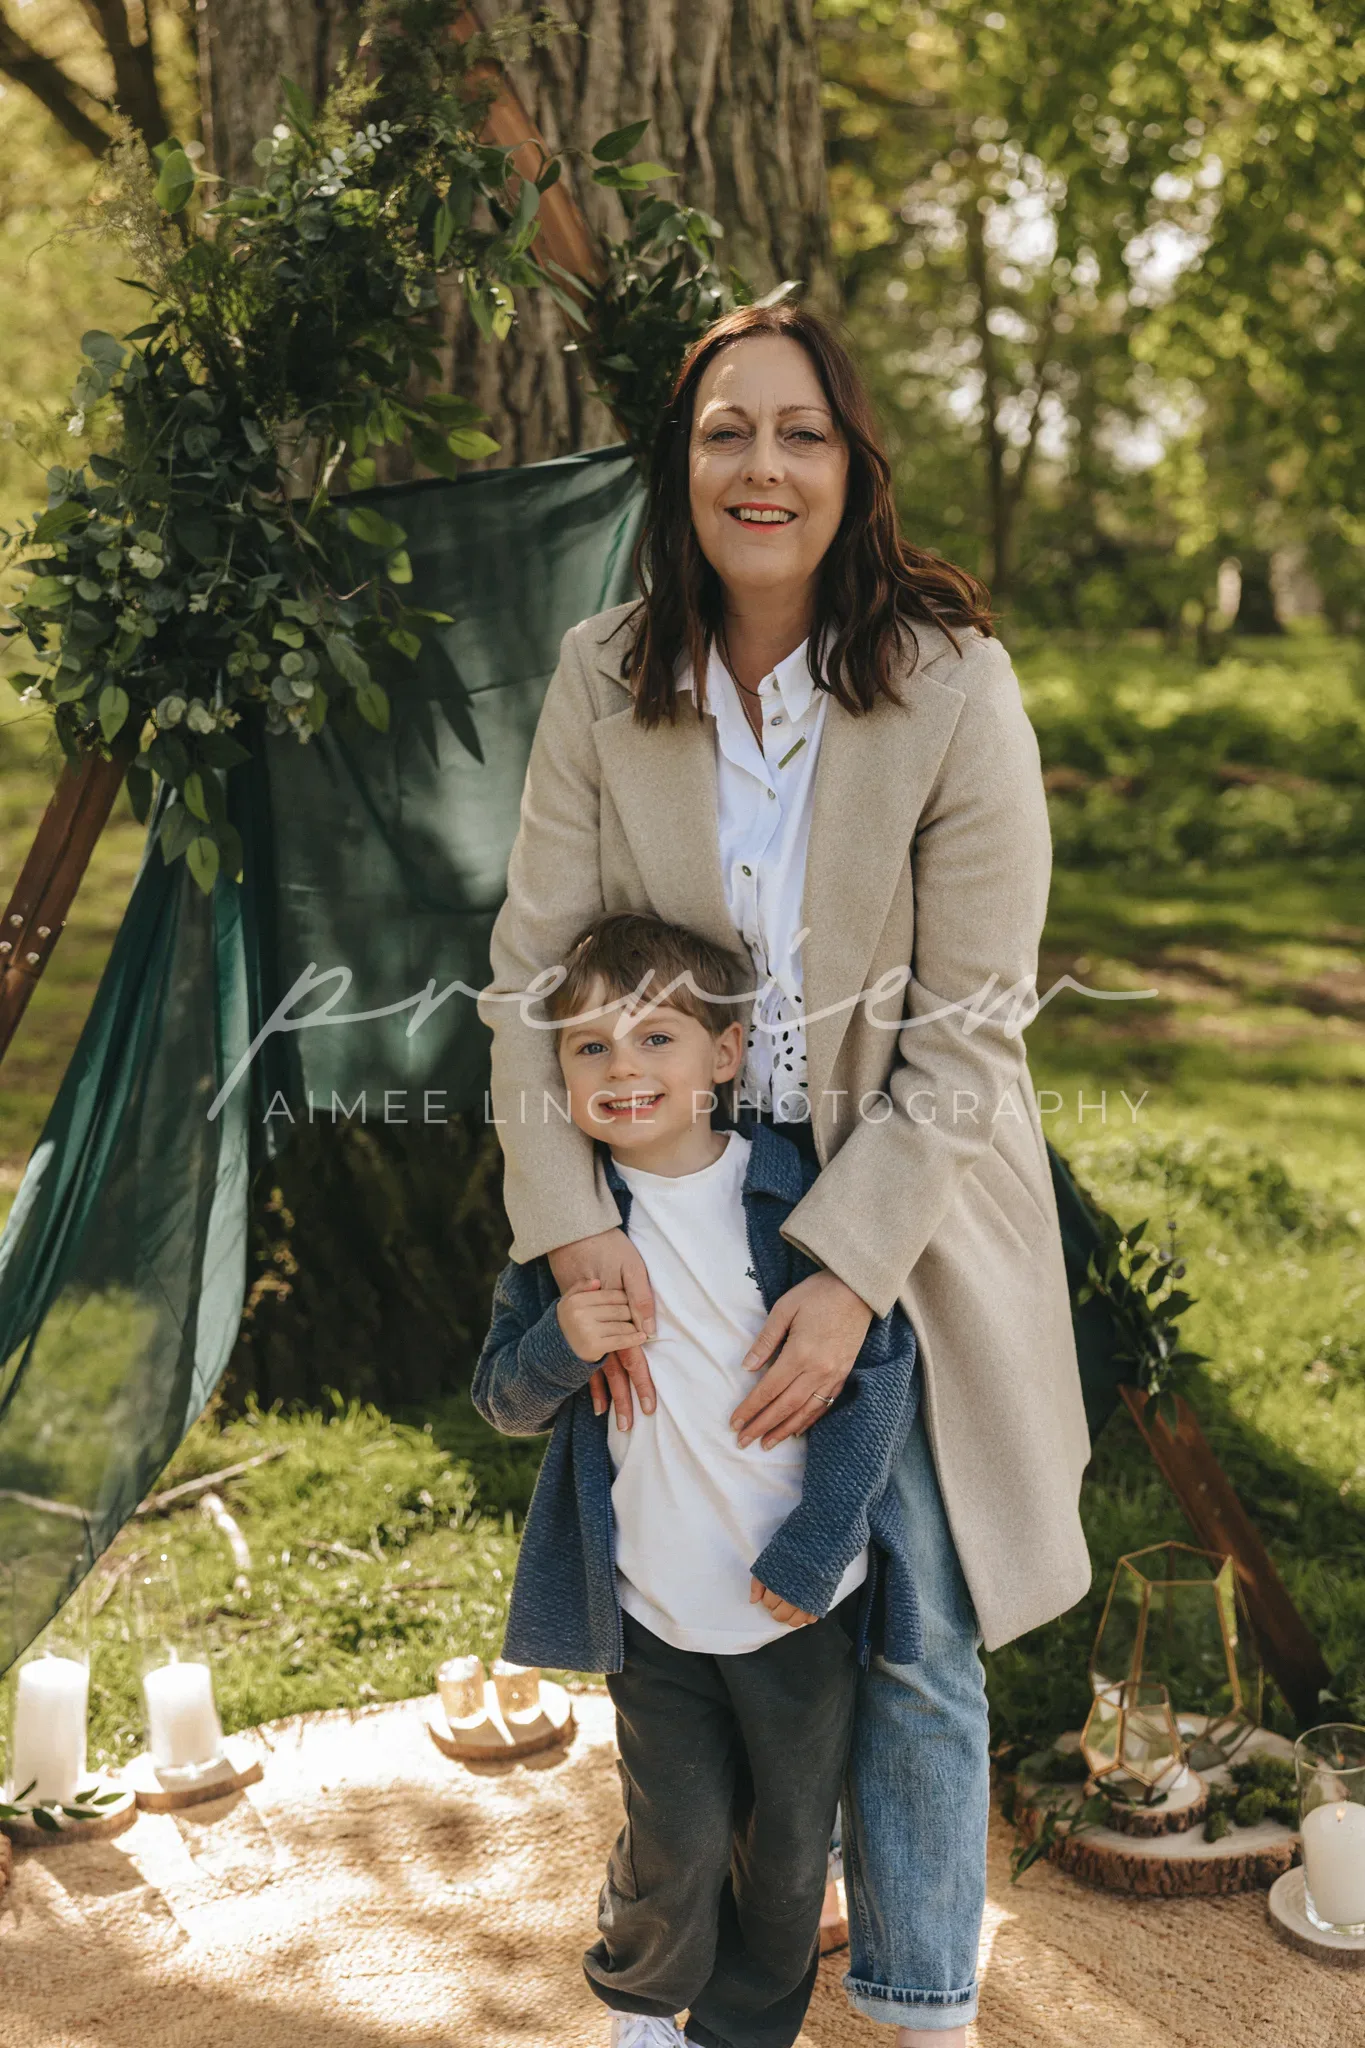 A woman and a young boy smile joyfully in a lush park, standing in front of a tree adorned with a whimsical green fabric. candles on the ground add a serene touch to the scene. both are dressed in stylish, casual outfits.